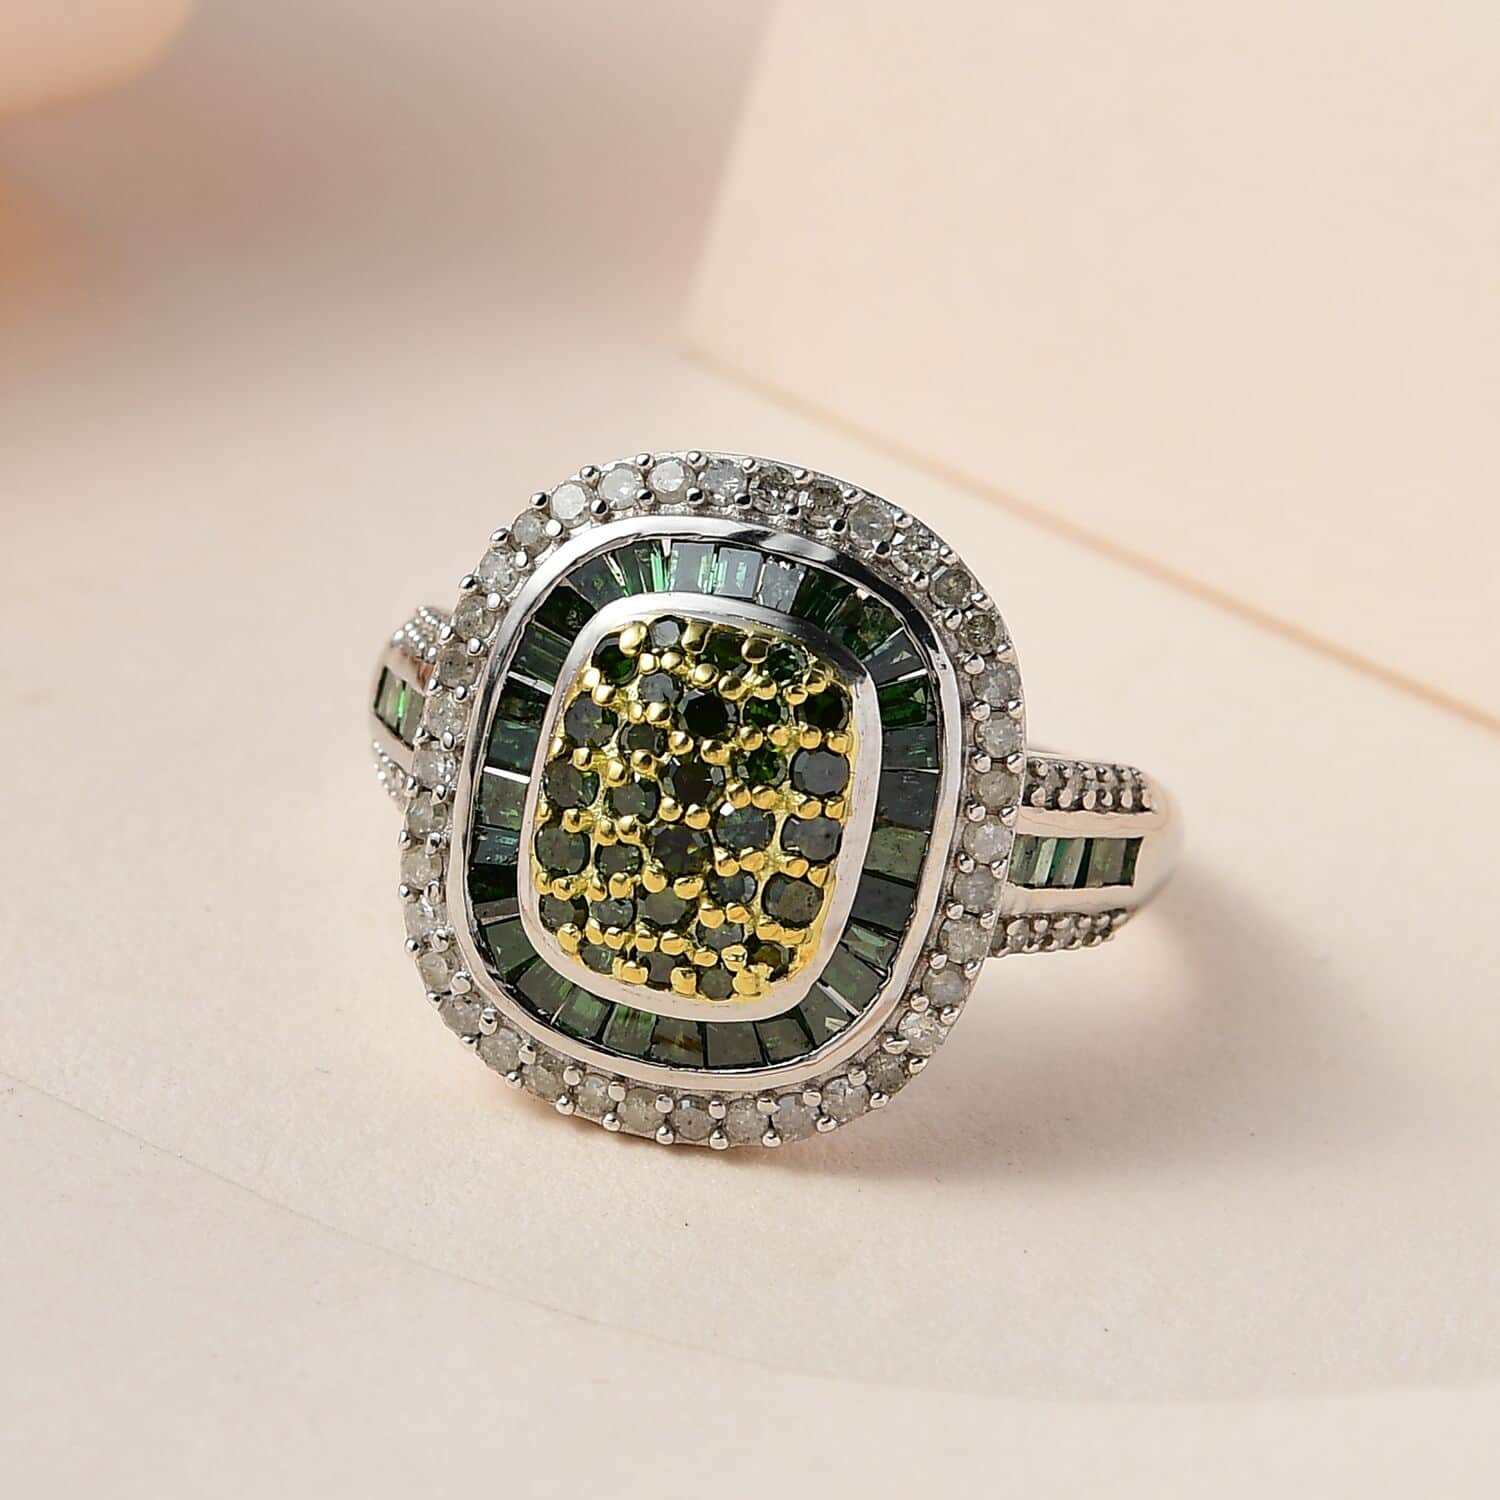 Buy Green and White Diamond Cocktail Ring in Platinum Over